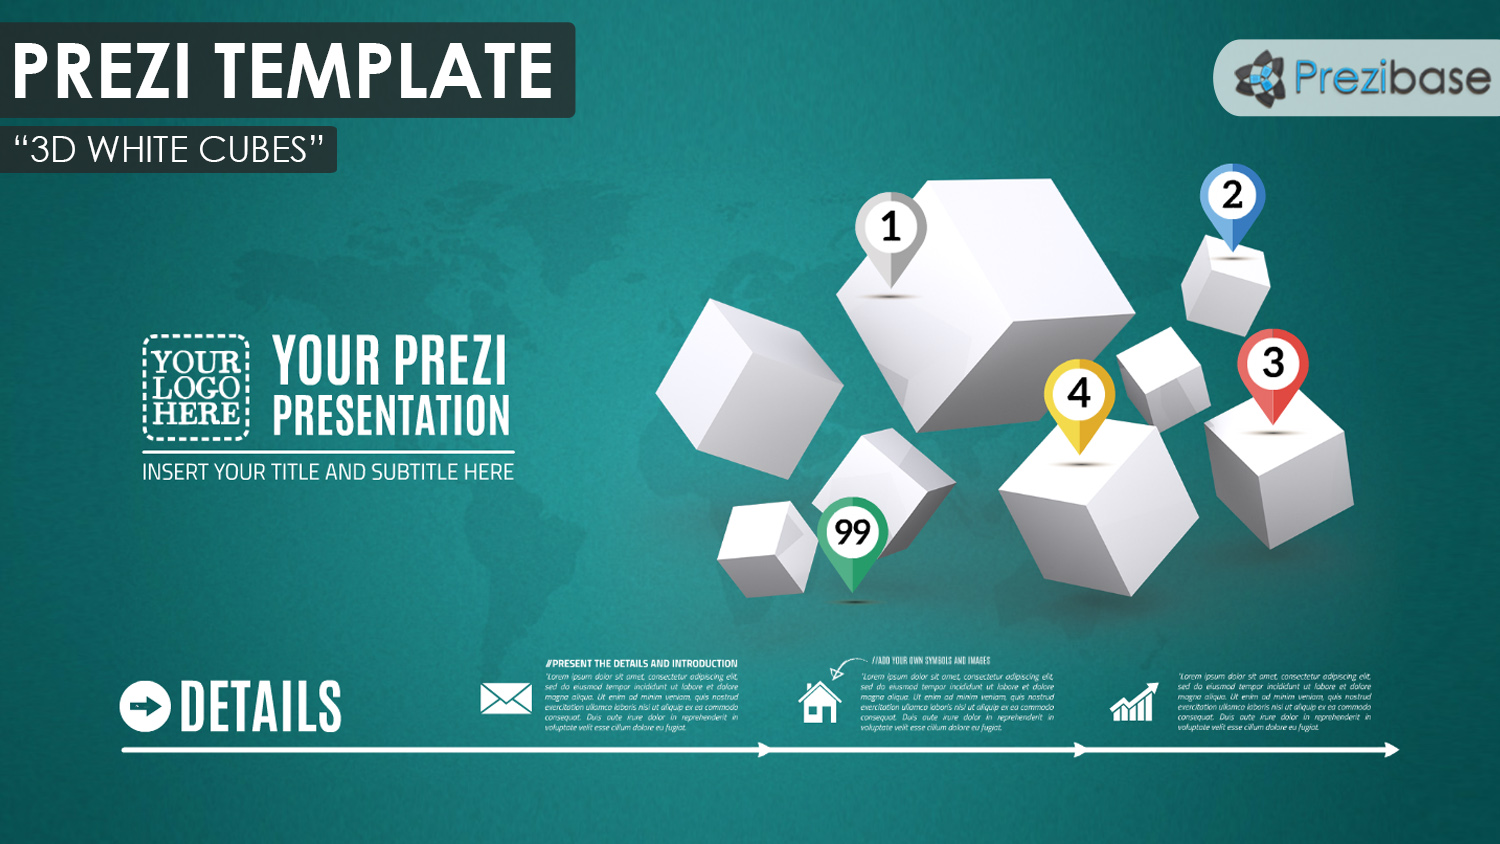 3D white cubes infographic and diagram business prezi template for presentations